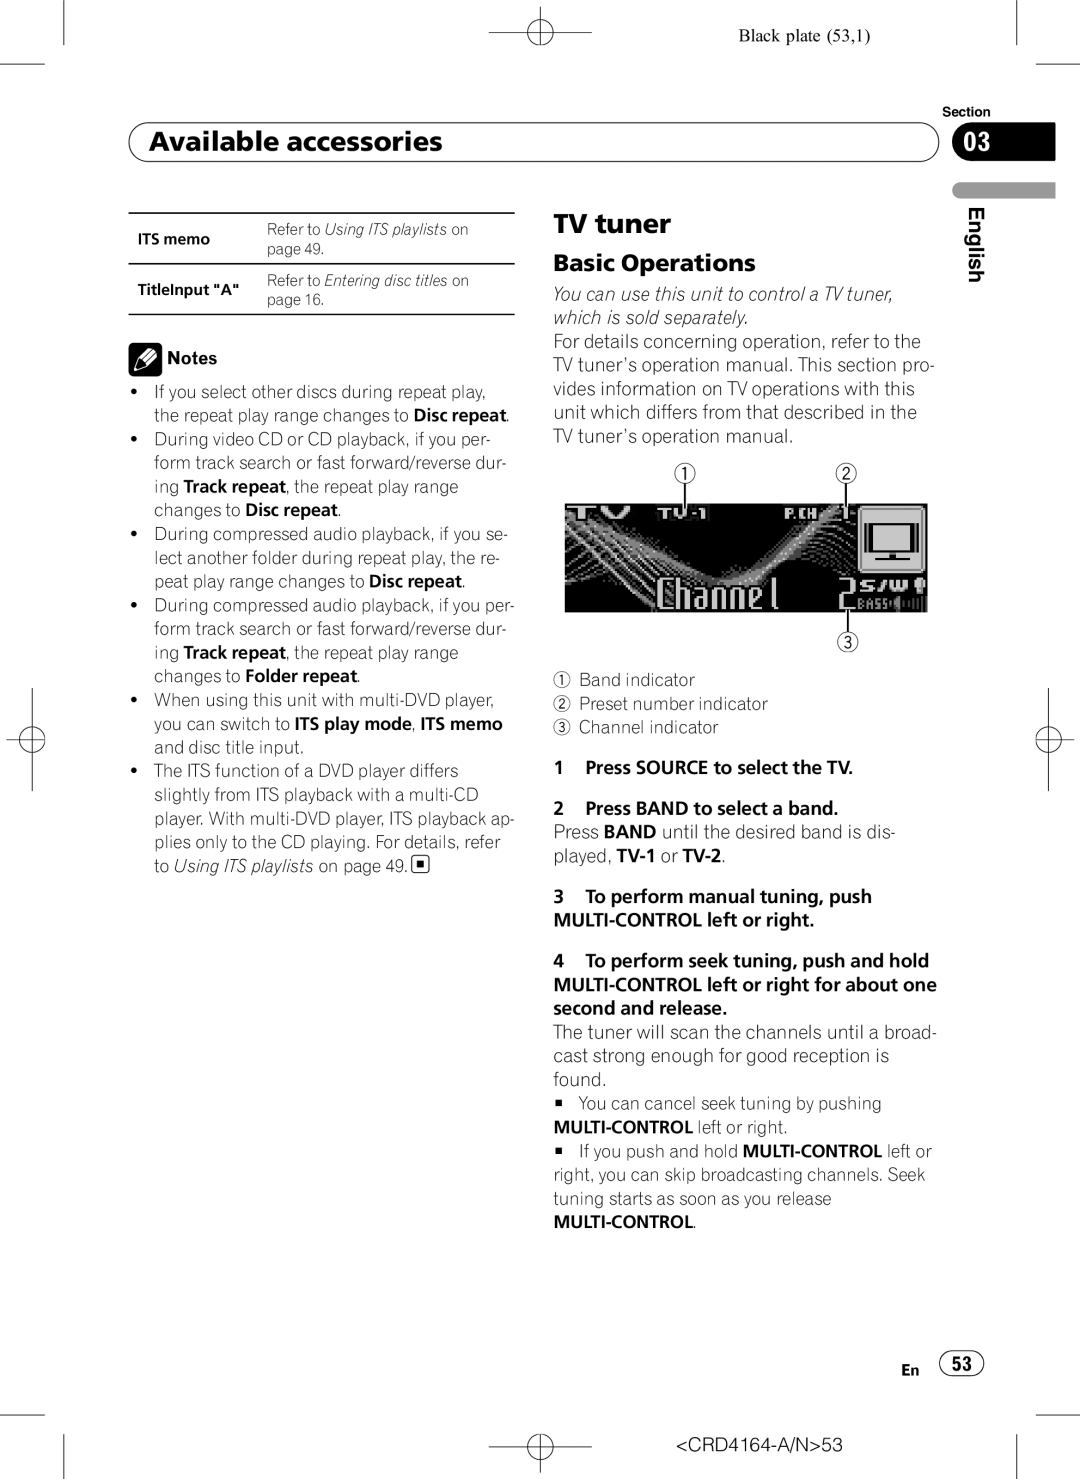 Pioneer DEH-P7950UB operation manual TV tuner, Black plate 53,1, Available accessories, Basic Operations 